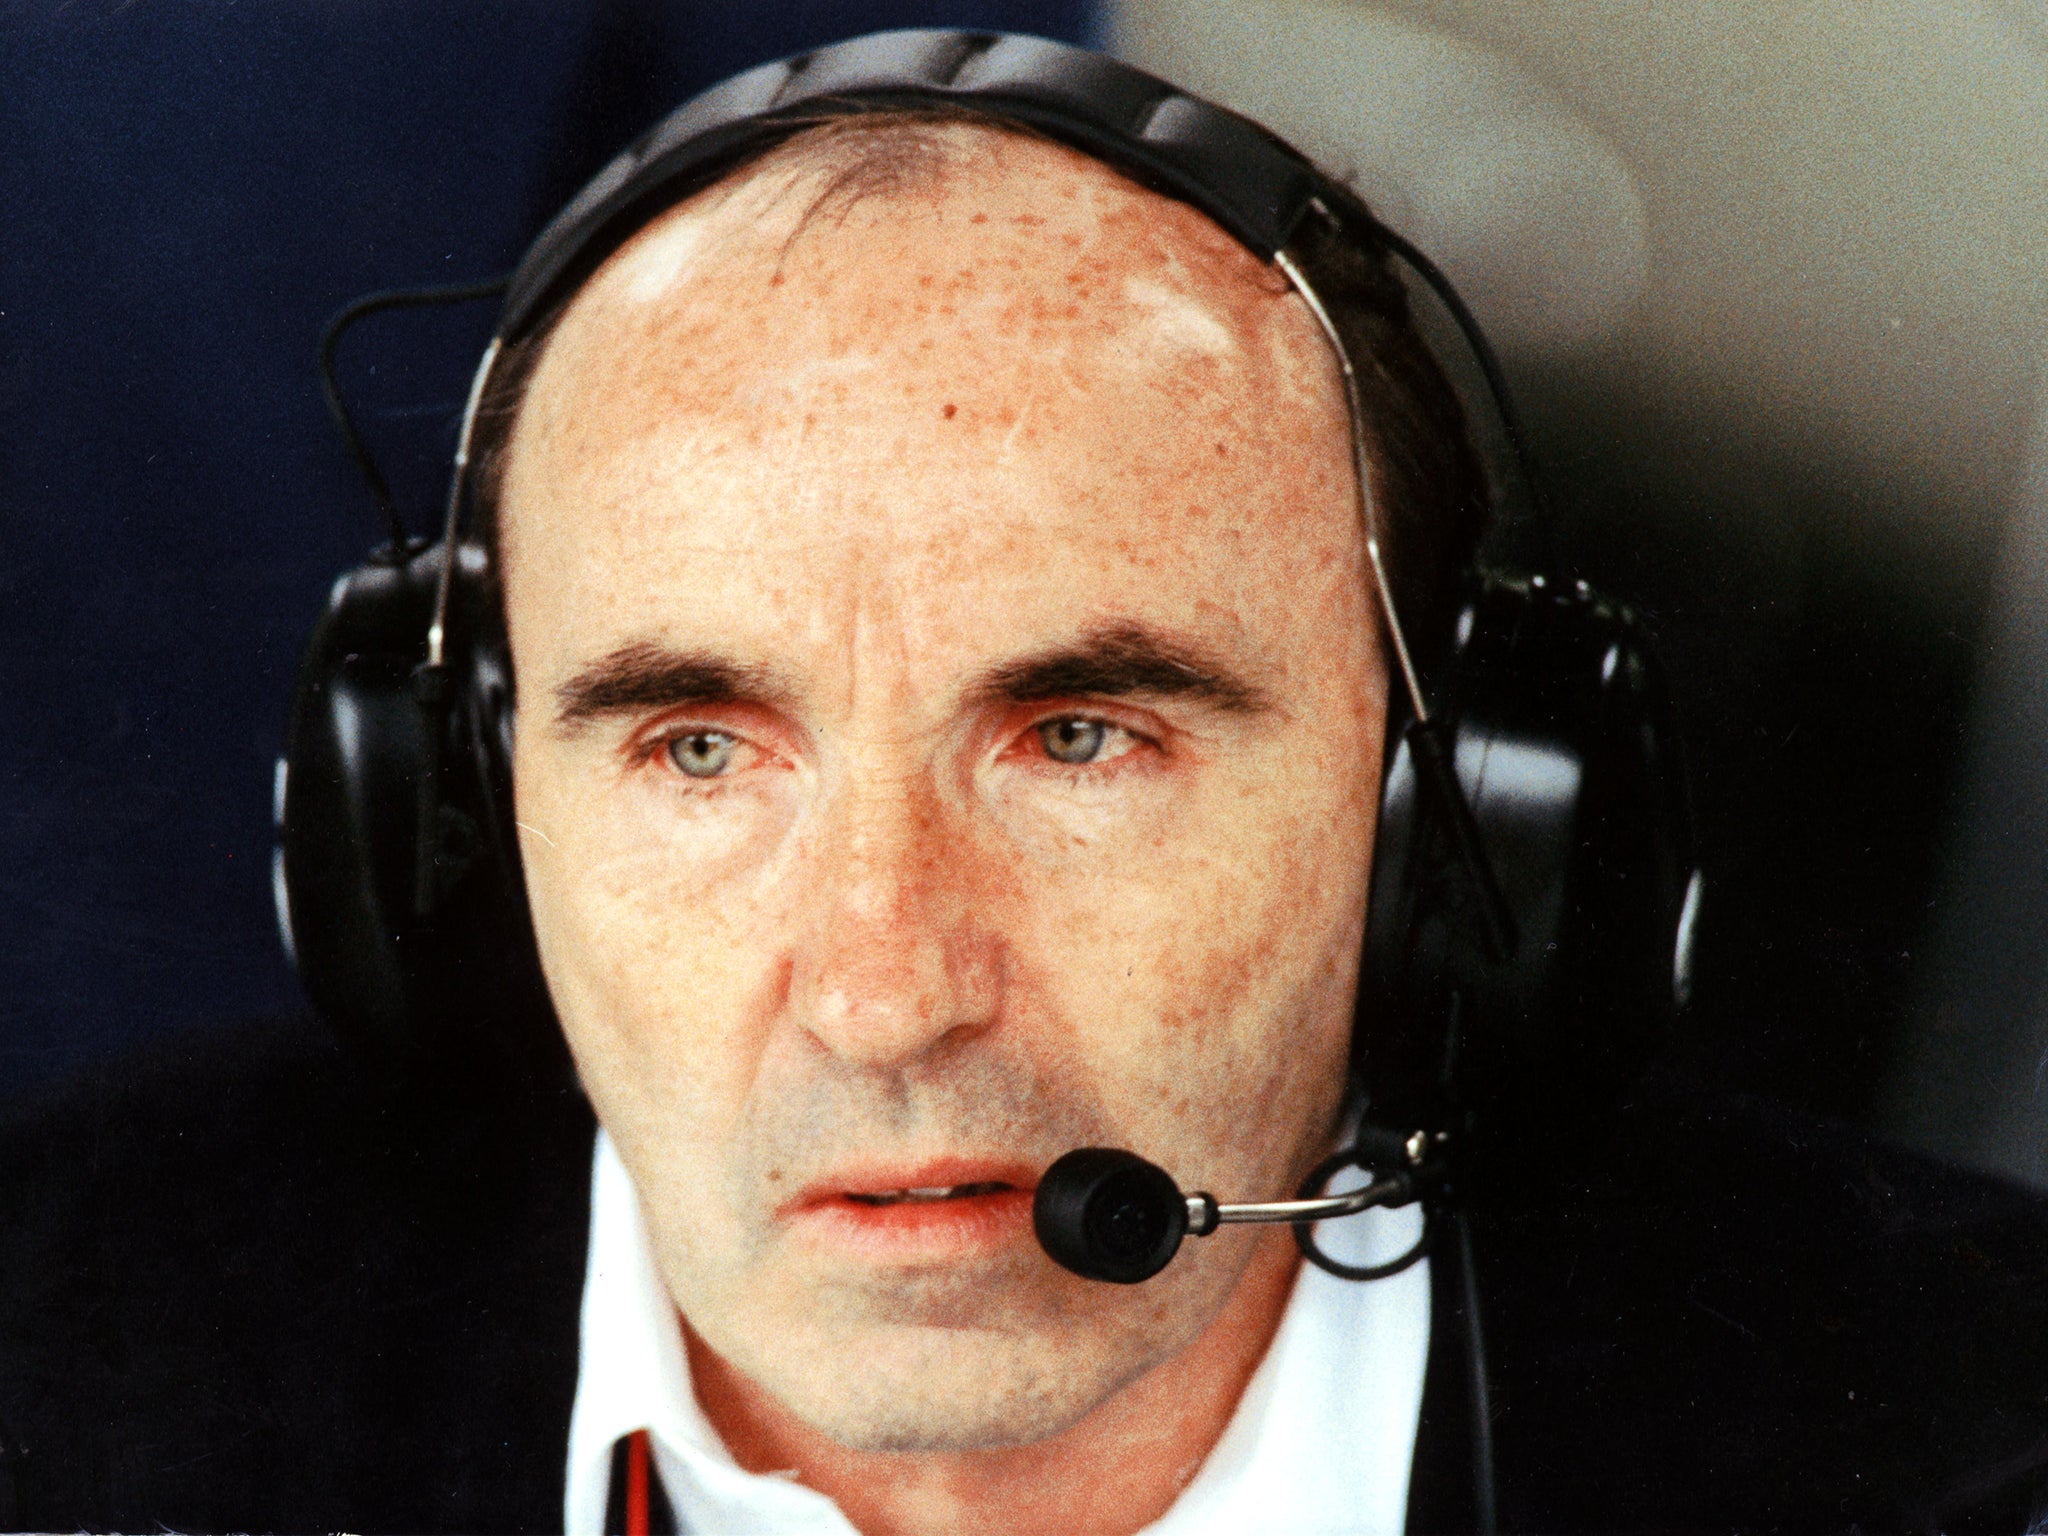 Williams went on to become the longest-serving principal in Formula One history